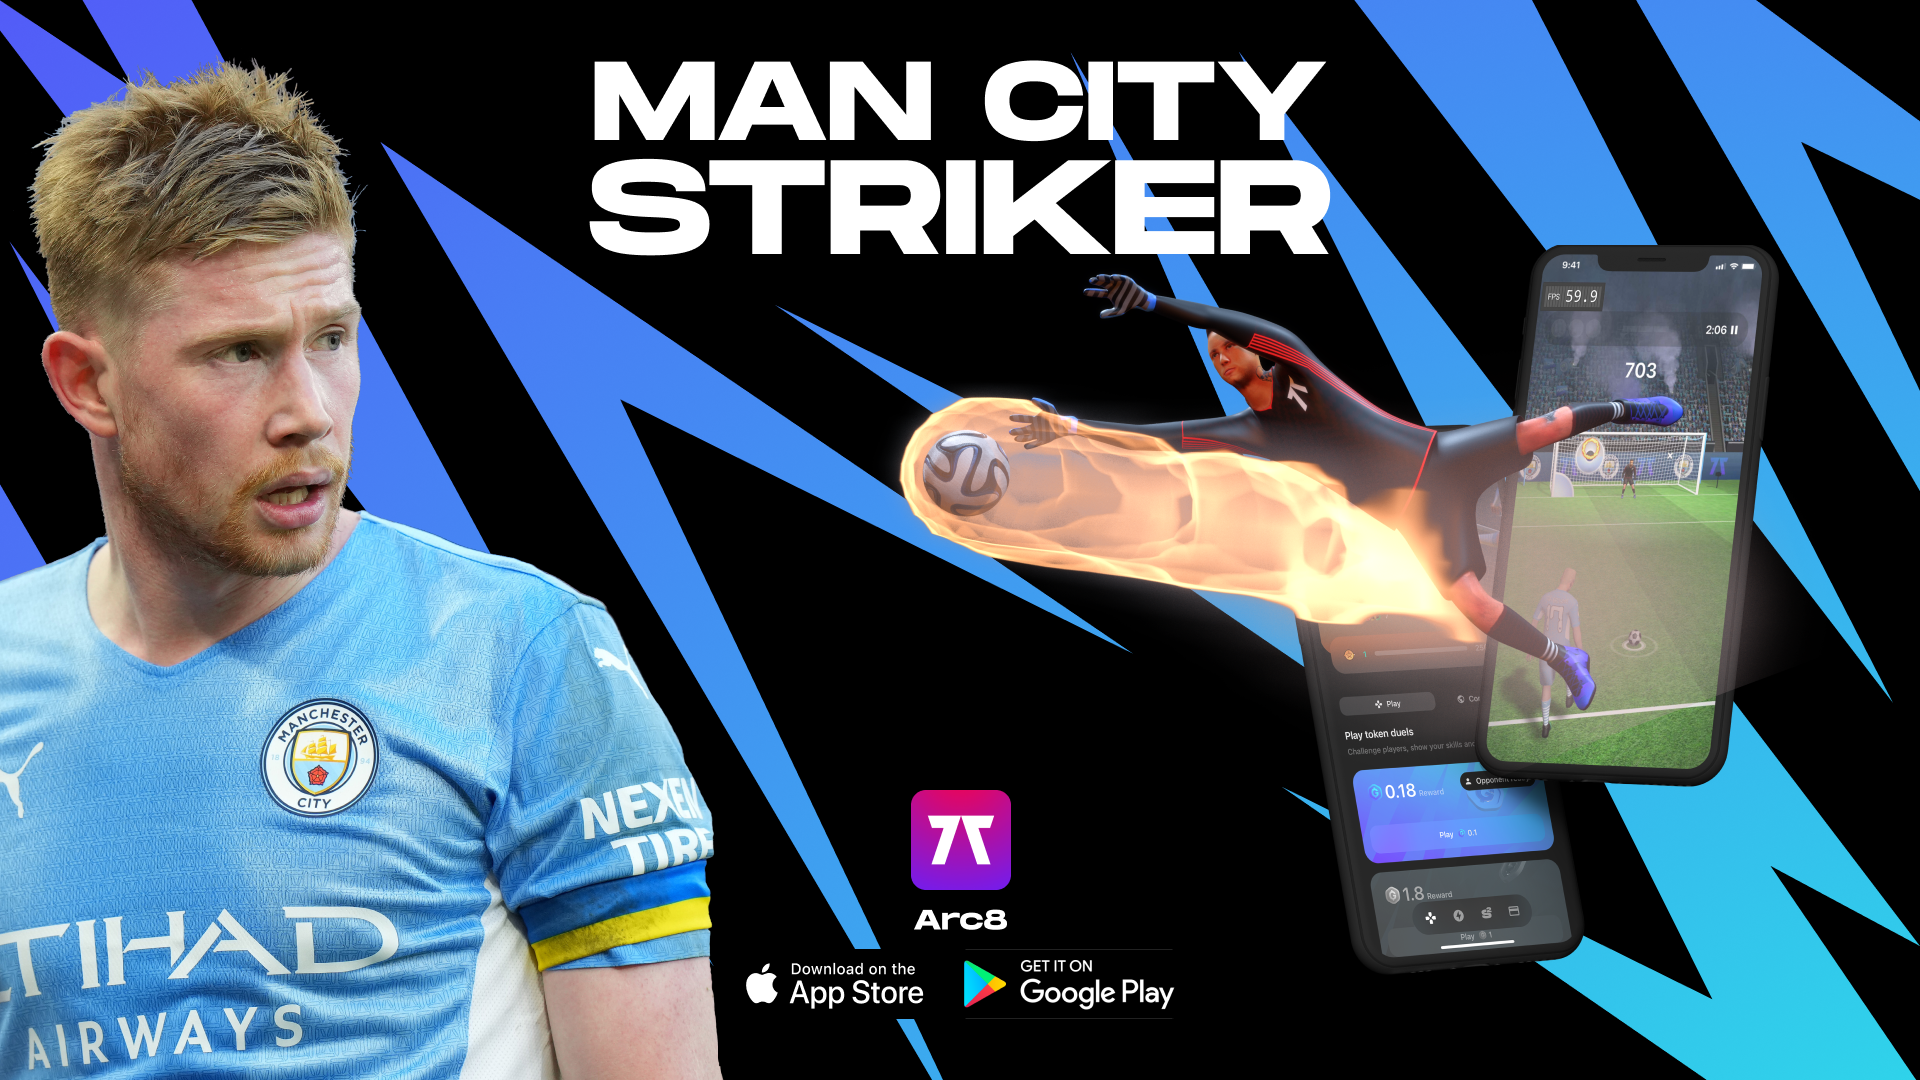 GAMEE and Manchester City FC launch a ManCity Striker on Arc8